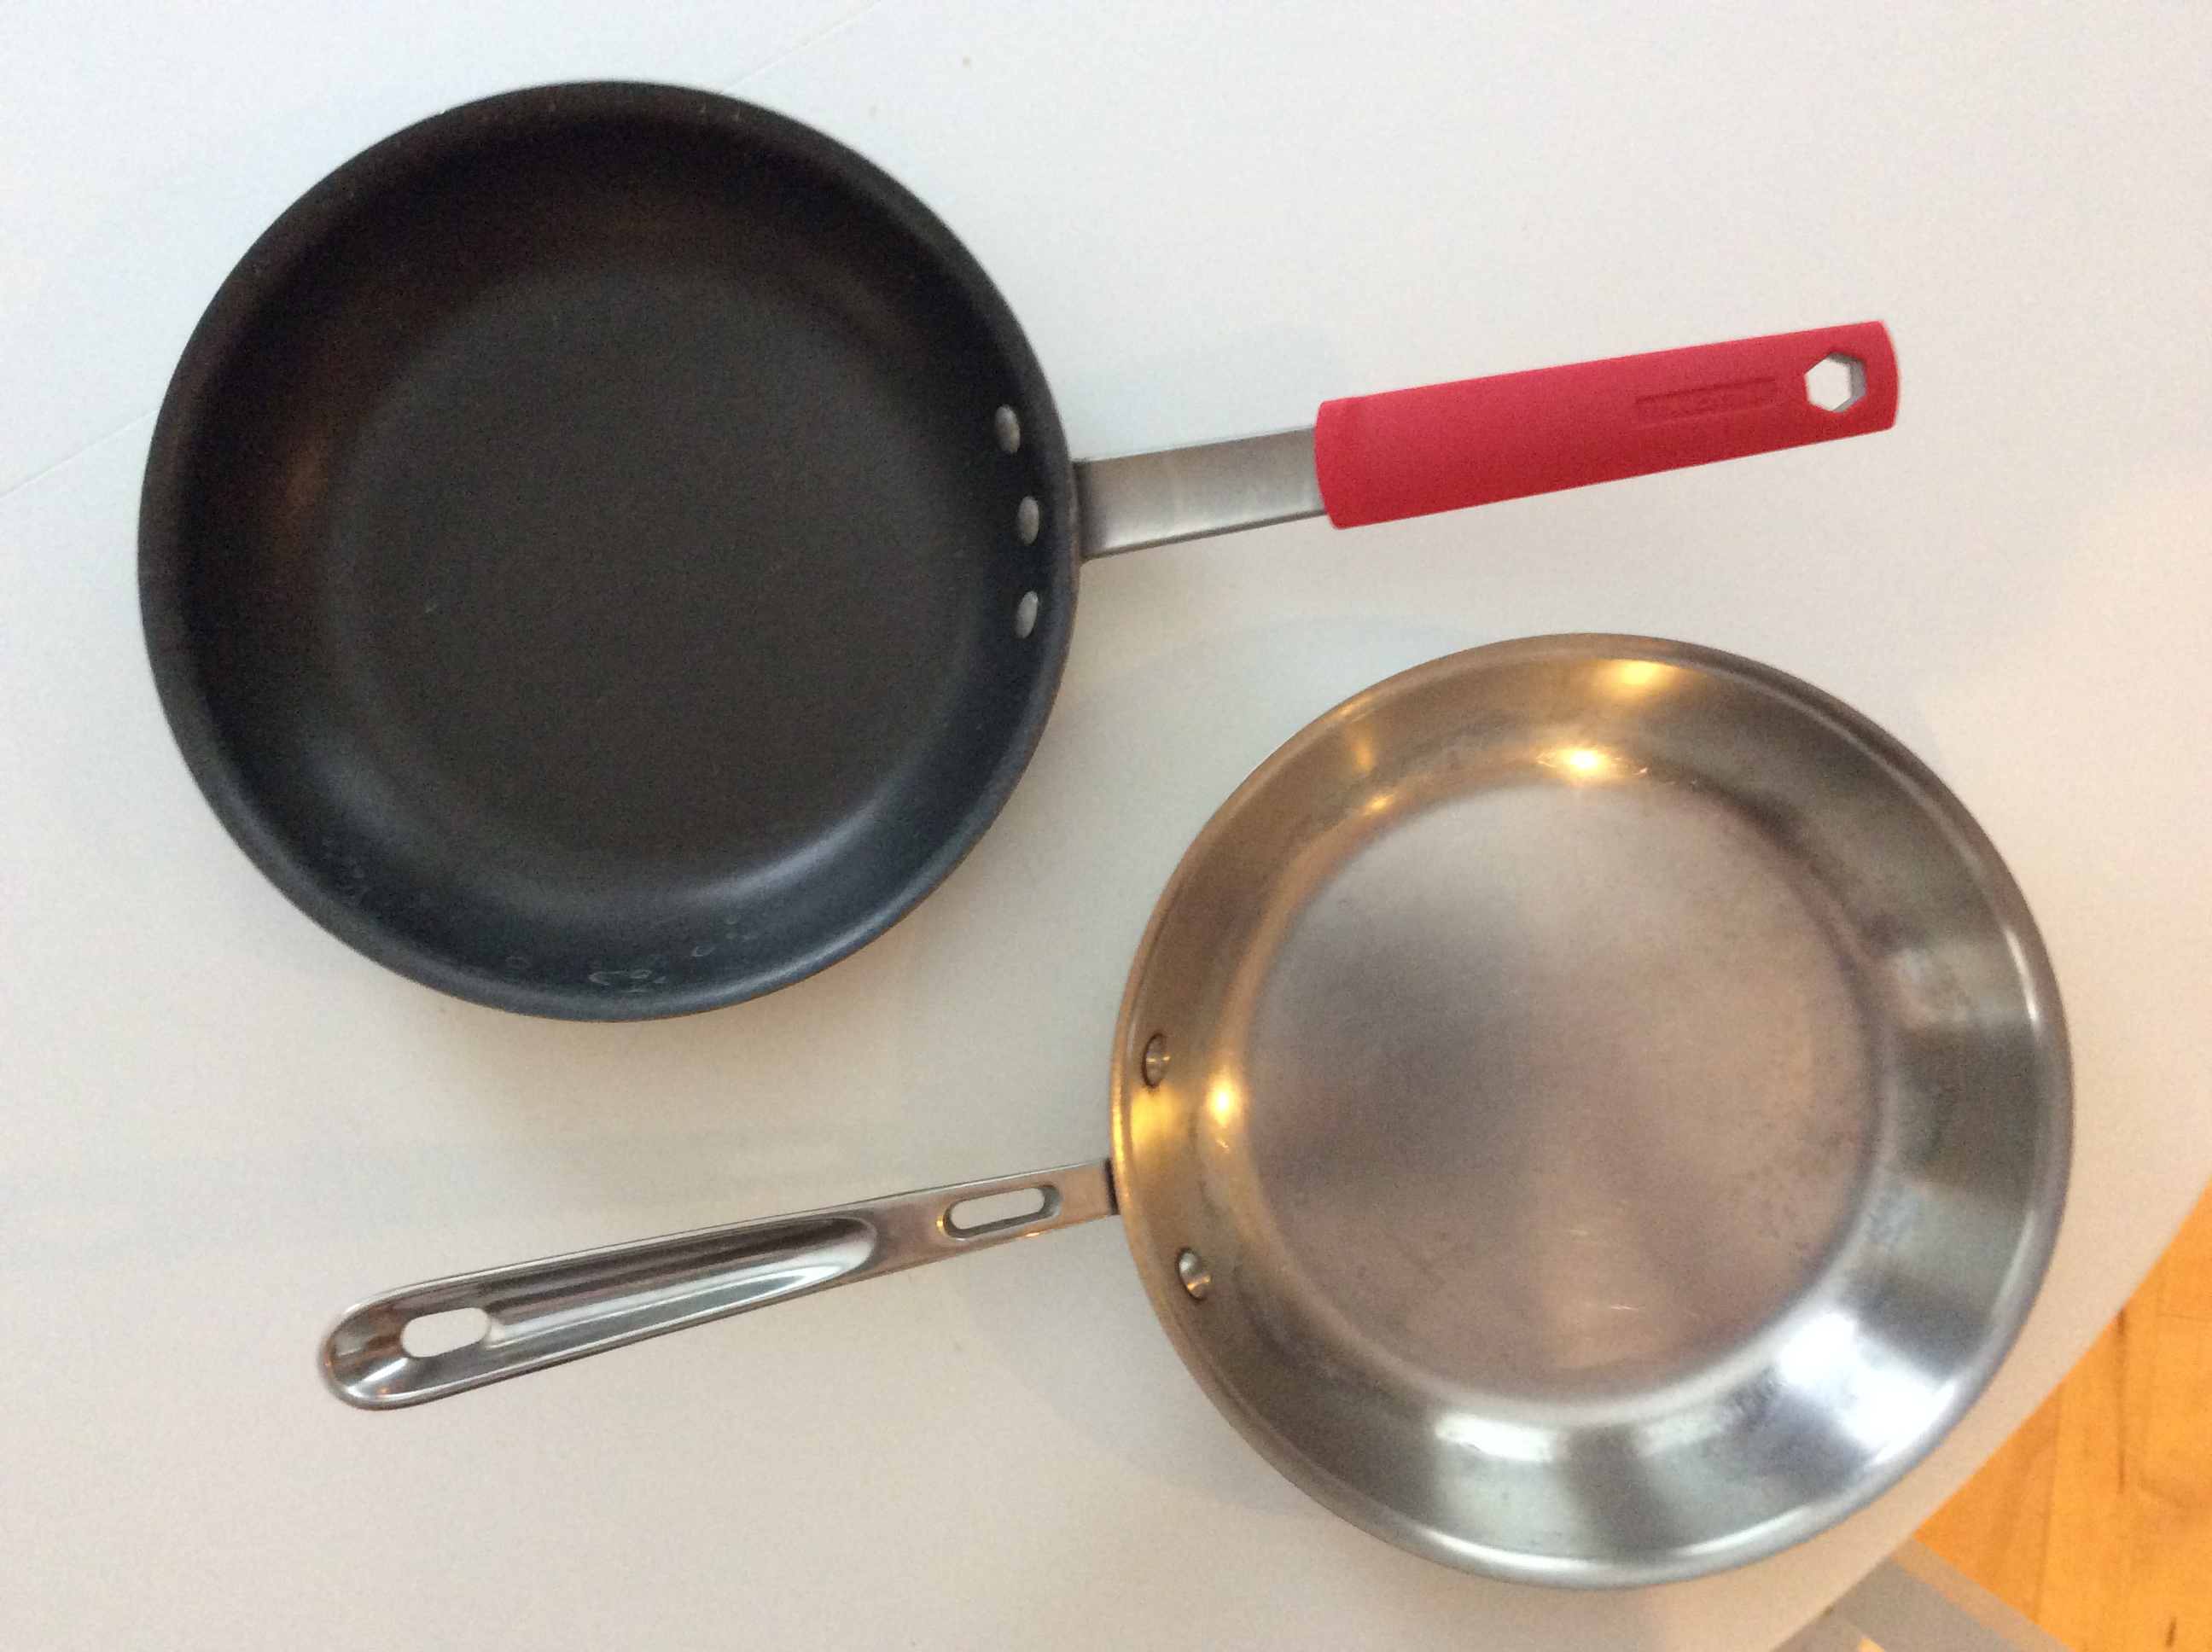 A Guide To Saute Pans + How To Use Them